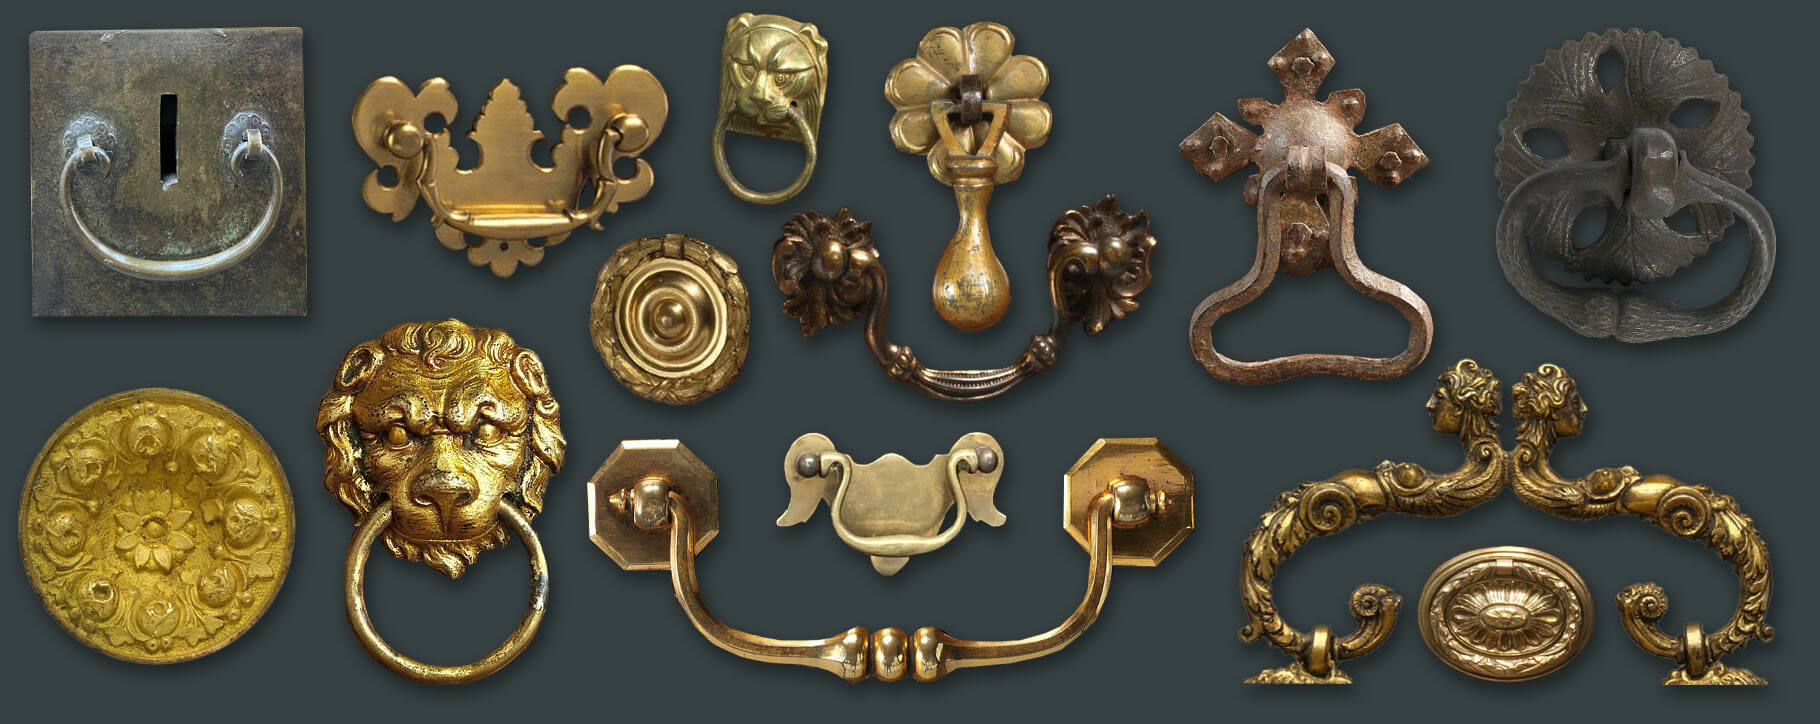 How to Date Antique Furniture Hardware